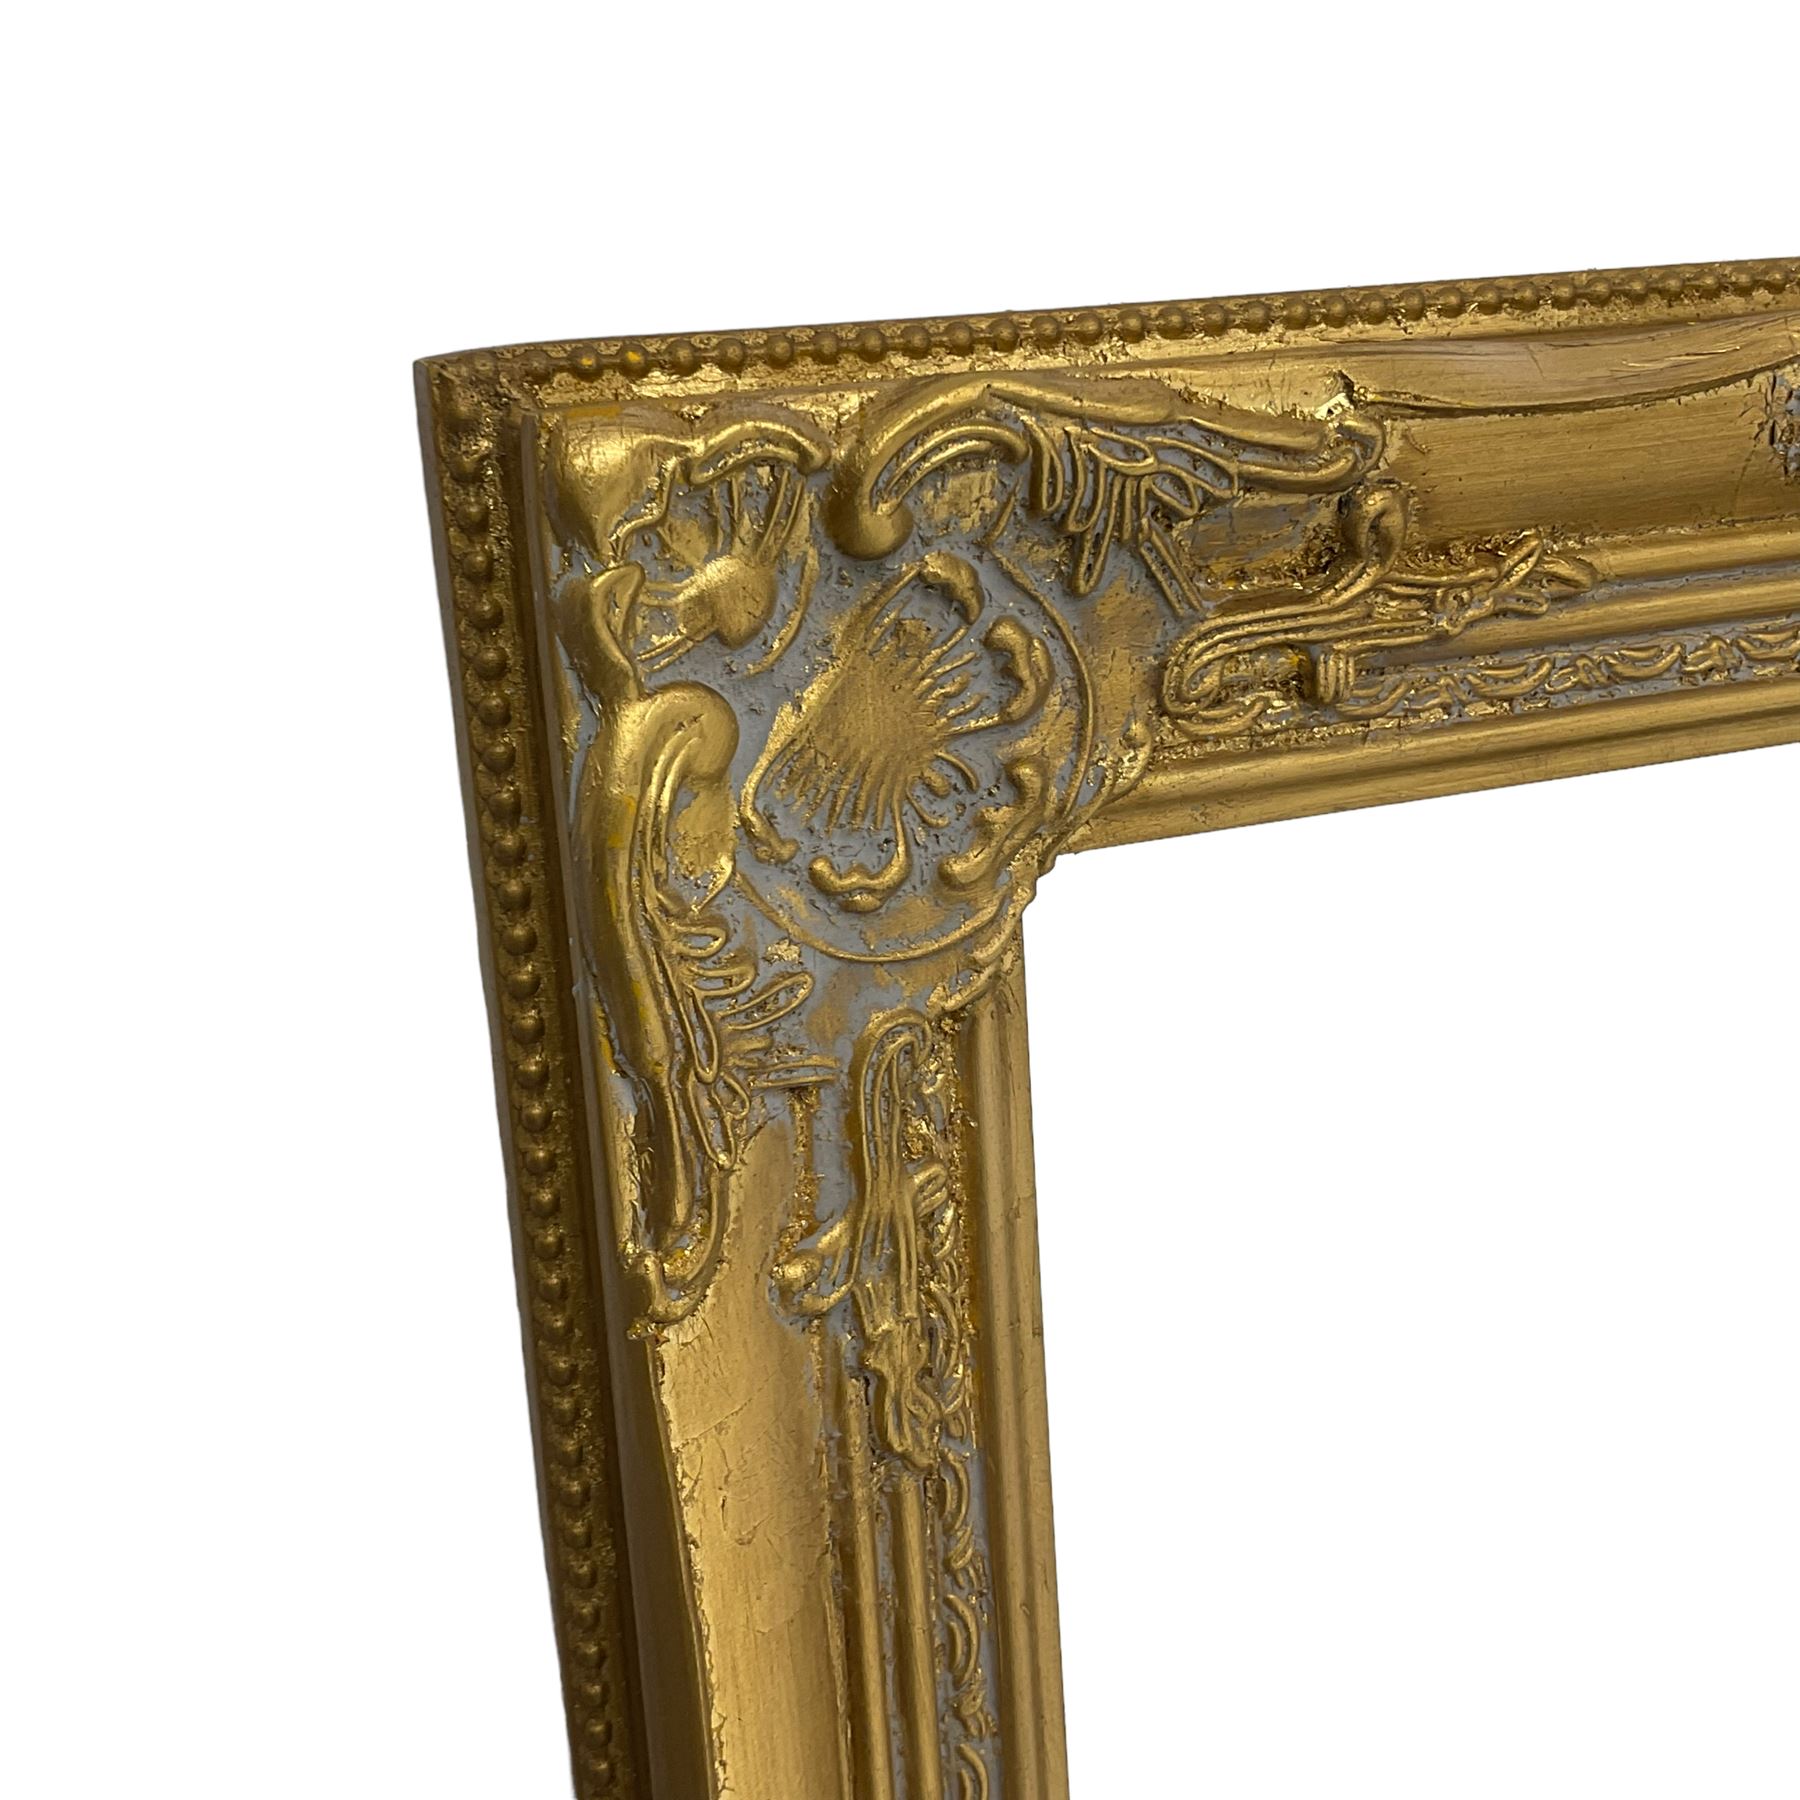 Pair bevelled edge wall mirrors in swept gilt frames decorated with ornate cartouches - Image 2 of 4